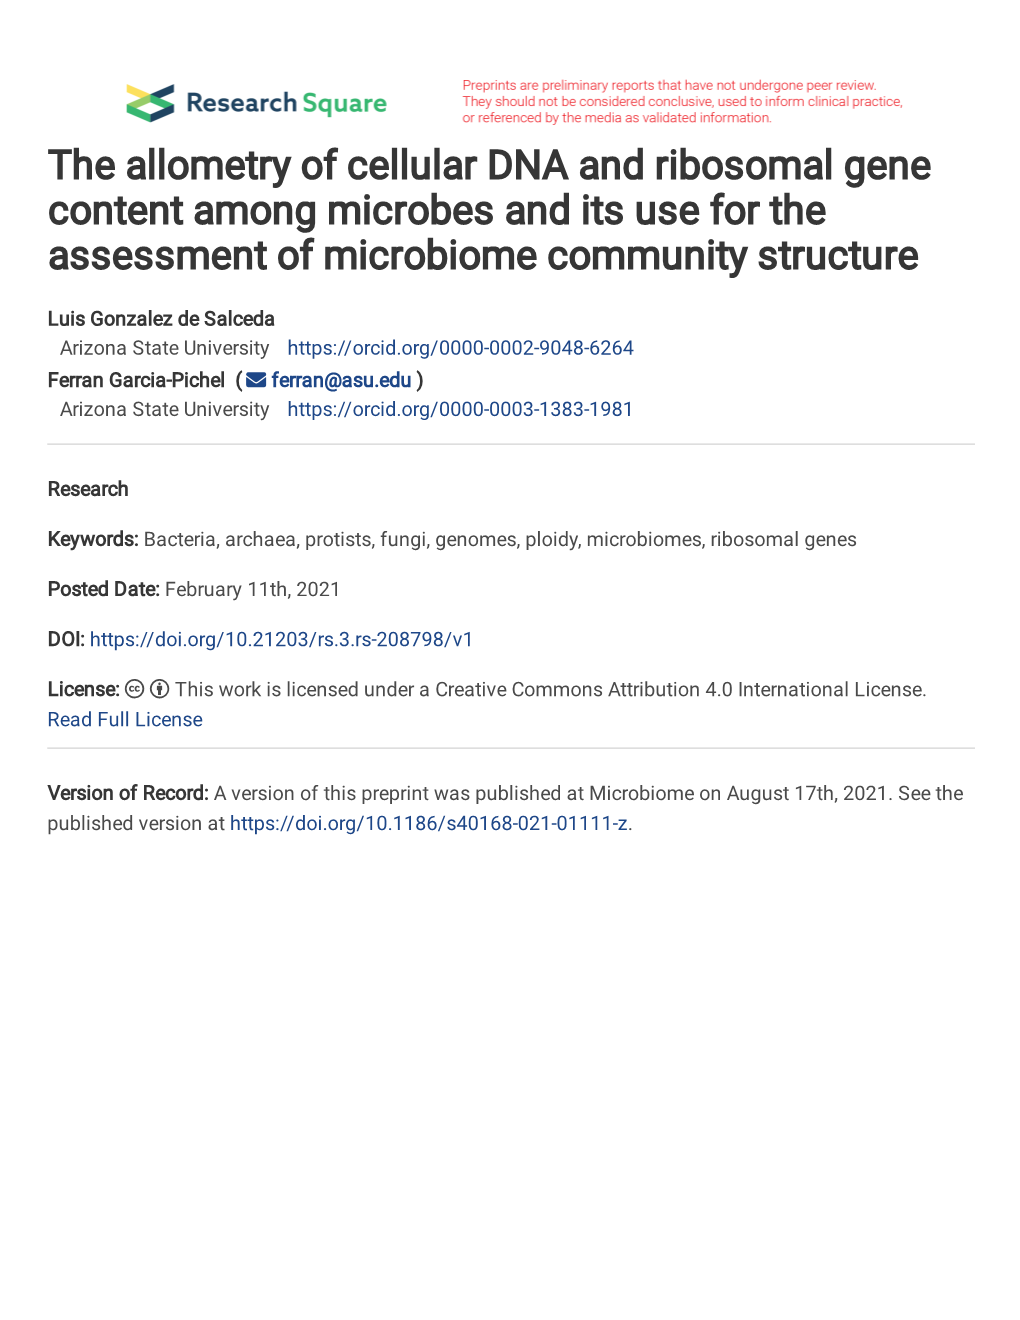 1 the Allometry of Cellular DNA and Ribosomal Gene Content Among Microbes and Its Use